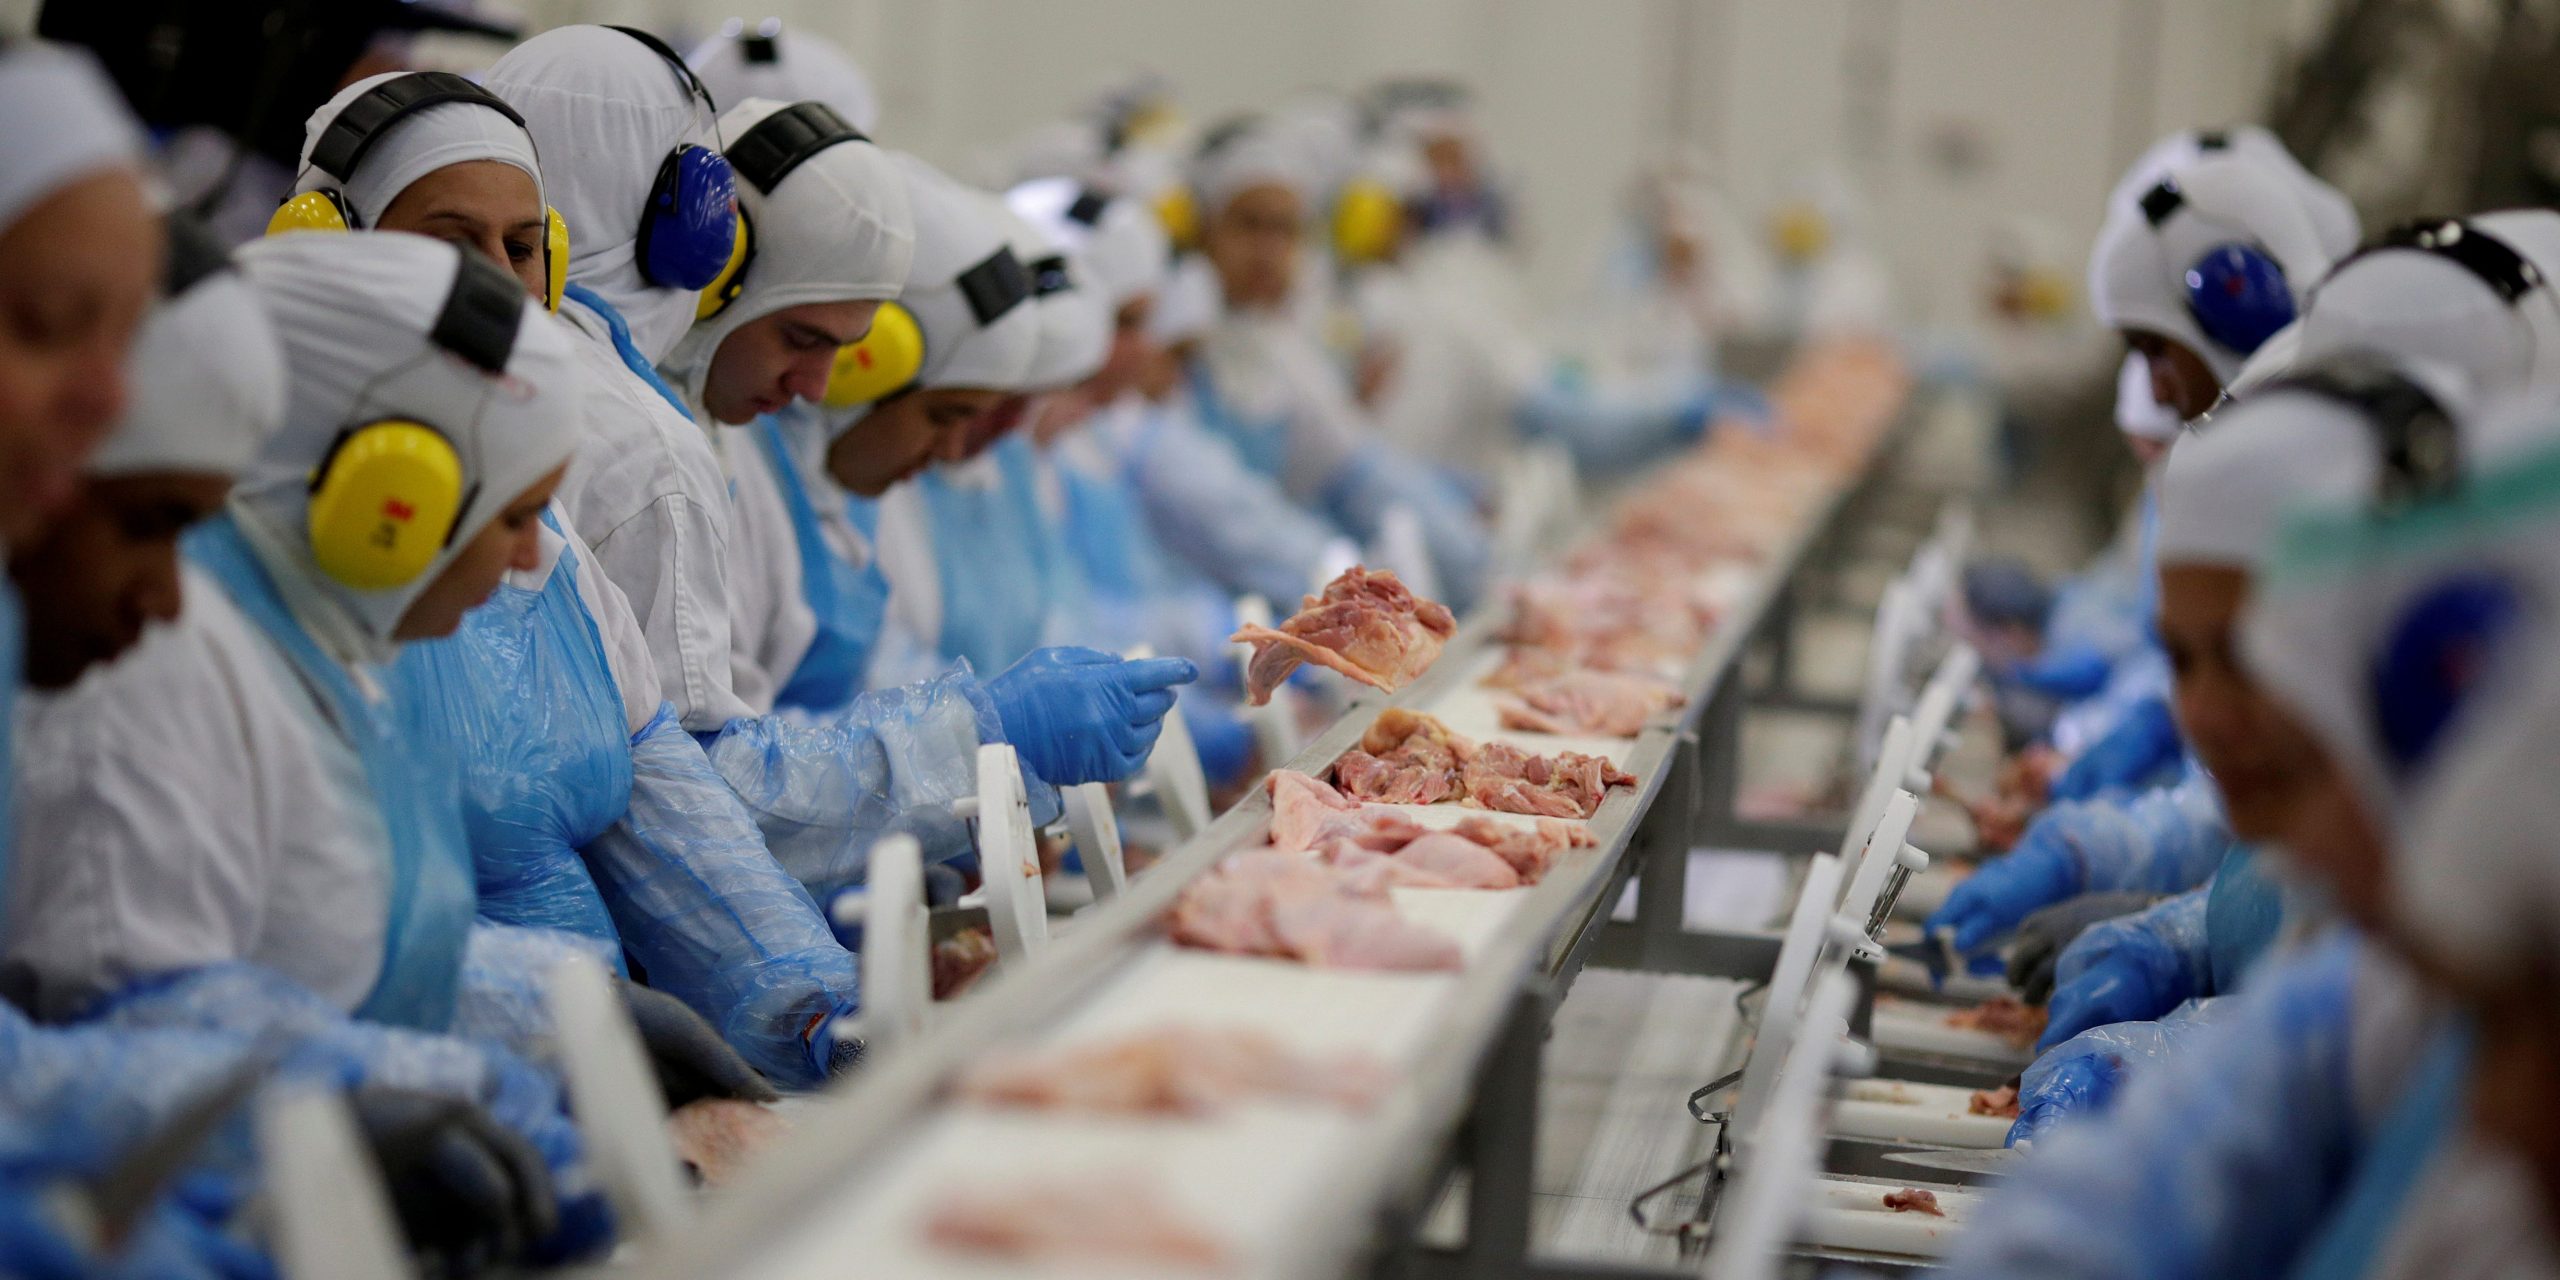 FILE PHOTO: Employees are seen during a technical visit of Brazil's Agriculture Minister Blairo Maggi at the Brazilian meatpacker JBS SA in the city of Lapa, Parana state, Brazil, March 21, 2017. REUTERS/Ueslei Marcelino/File Photo